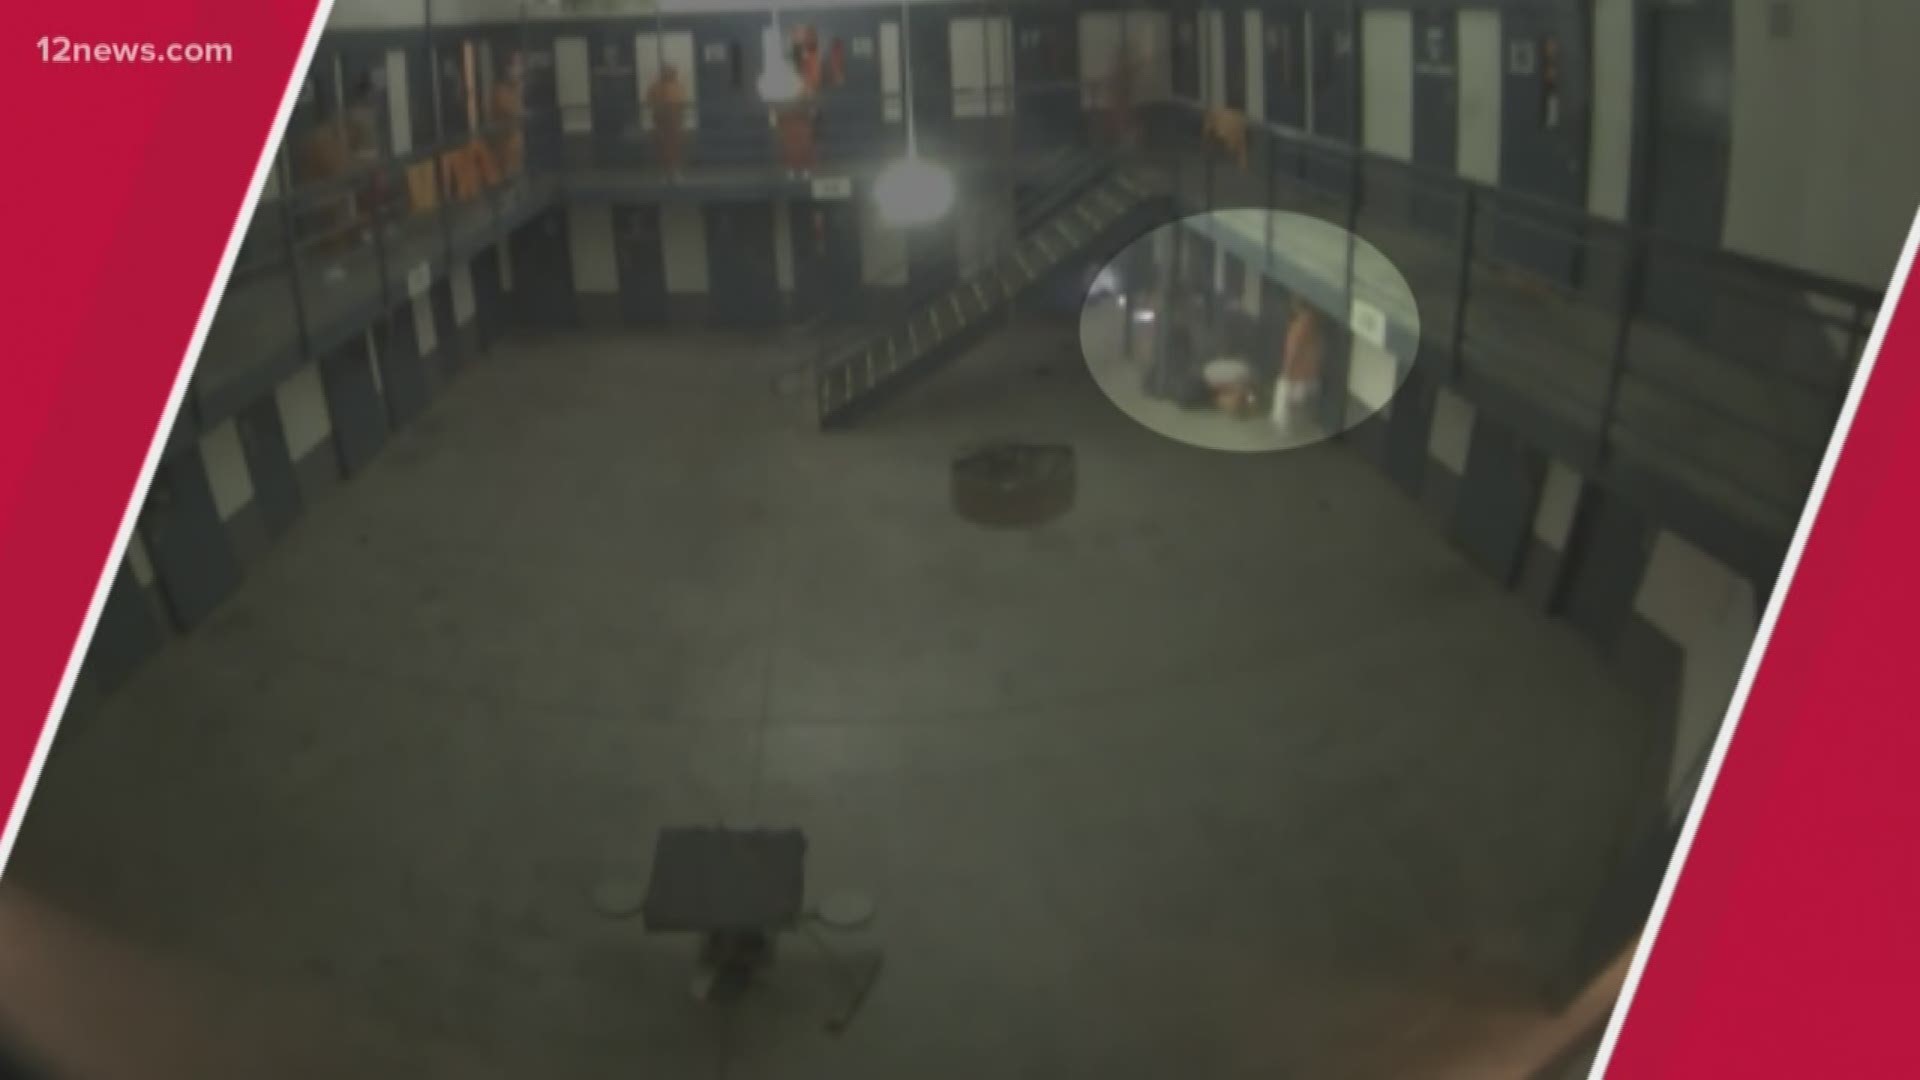 Close-custody inmates are being moved to other state-run prisons in Arizona as officials address issues with cell door locks at Lewis Prison in Buckeye.